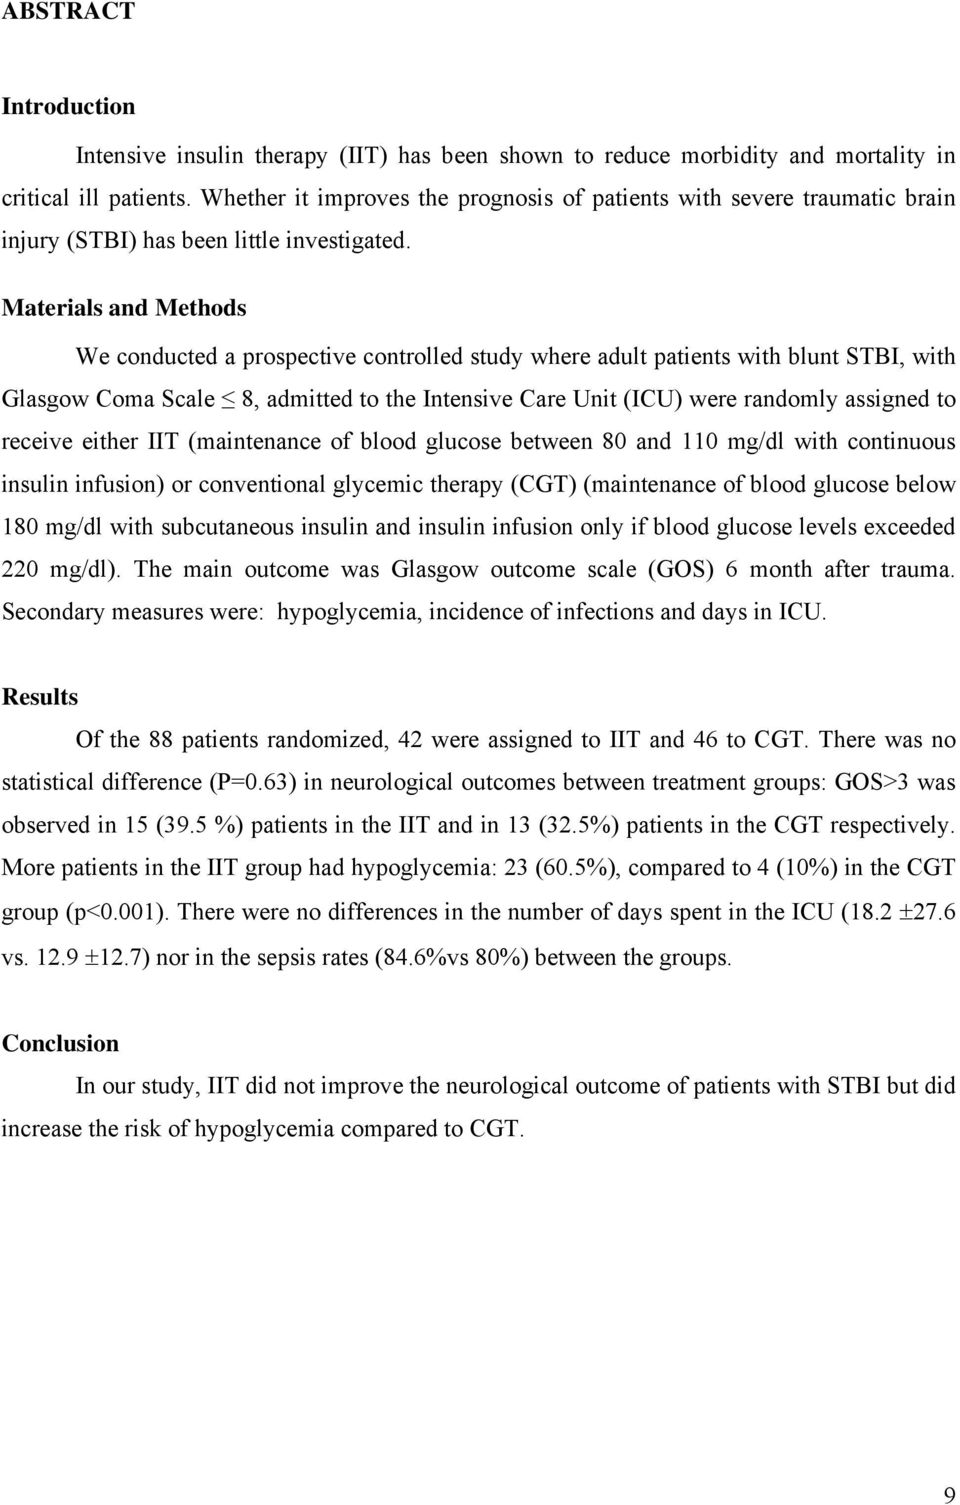 Materials and Methods We conducted a prospective controlled study where adult patients with blunt STBI, with Glasgow Coma Scale 8, admitted to the Intensive Care Unit (ICU) were randomly assigned to